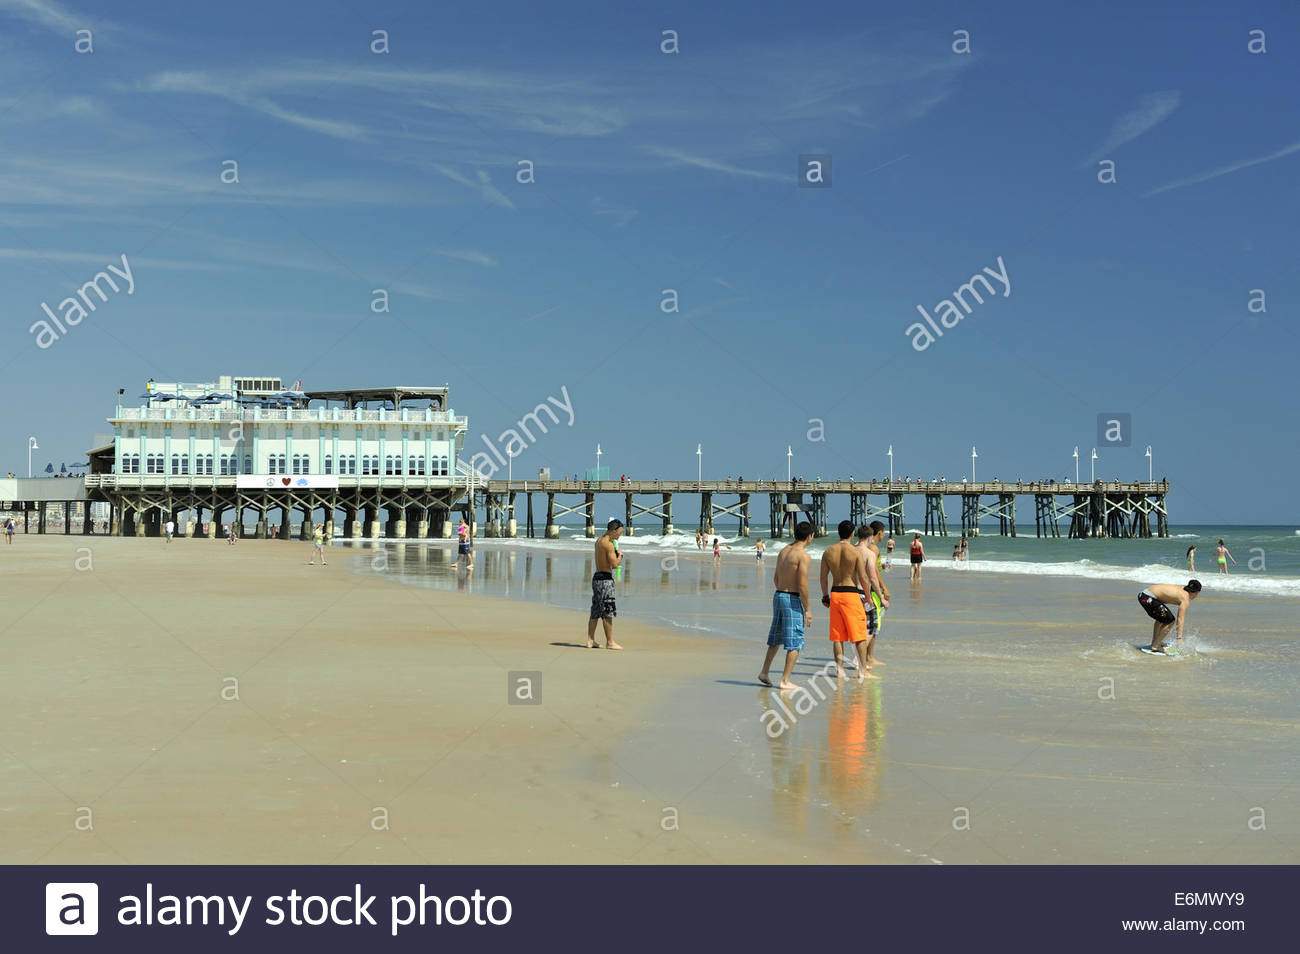 Group Of Teenage Boys Playing On Beach With Daytona Pier In